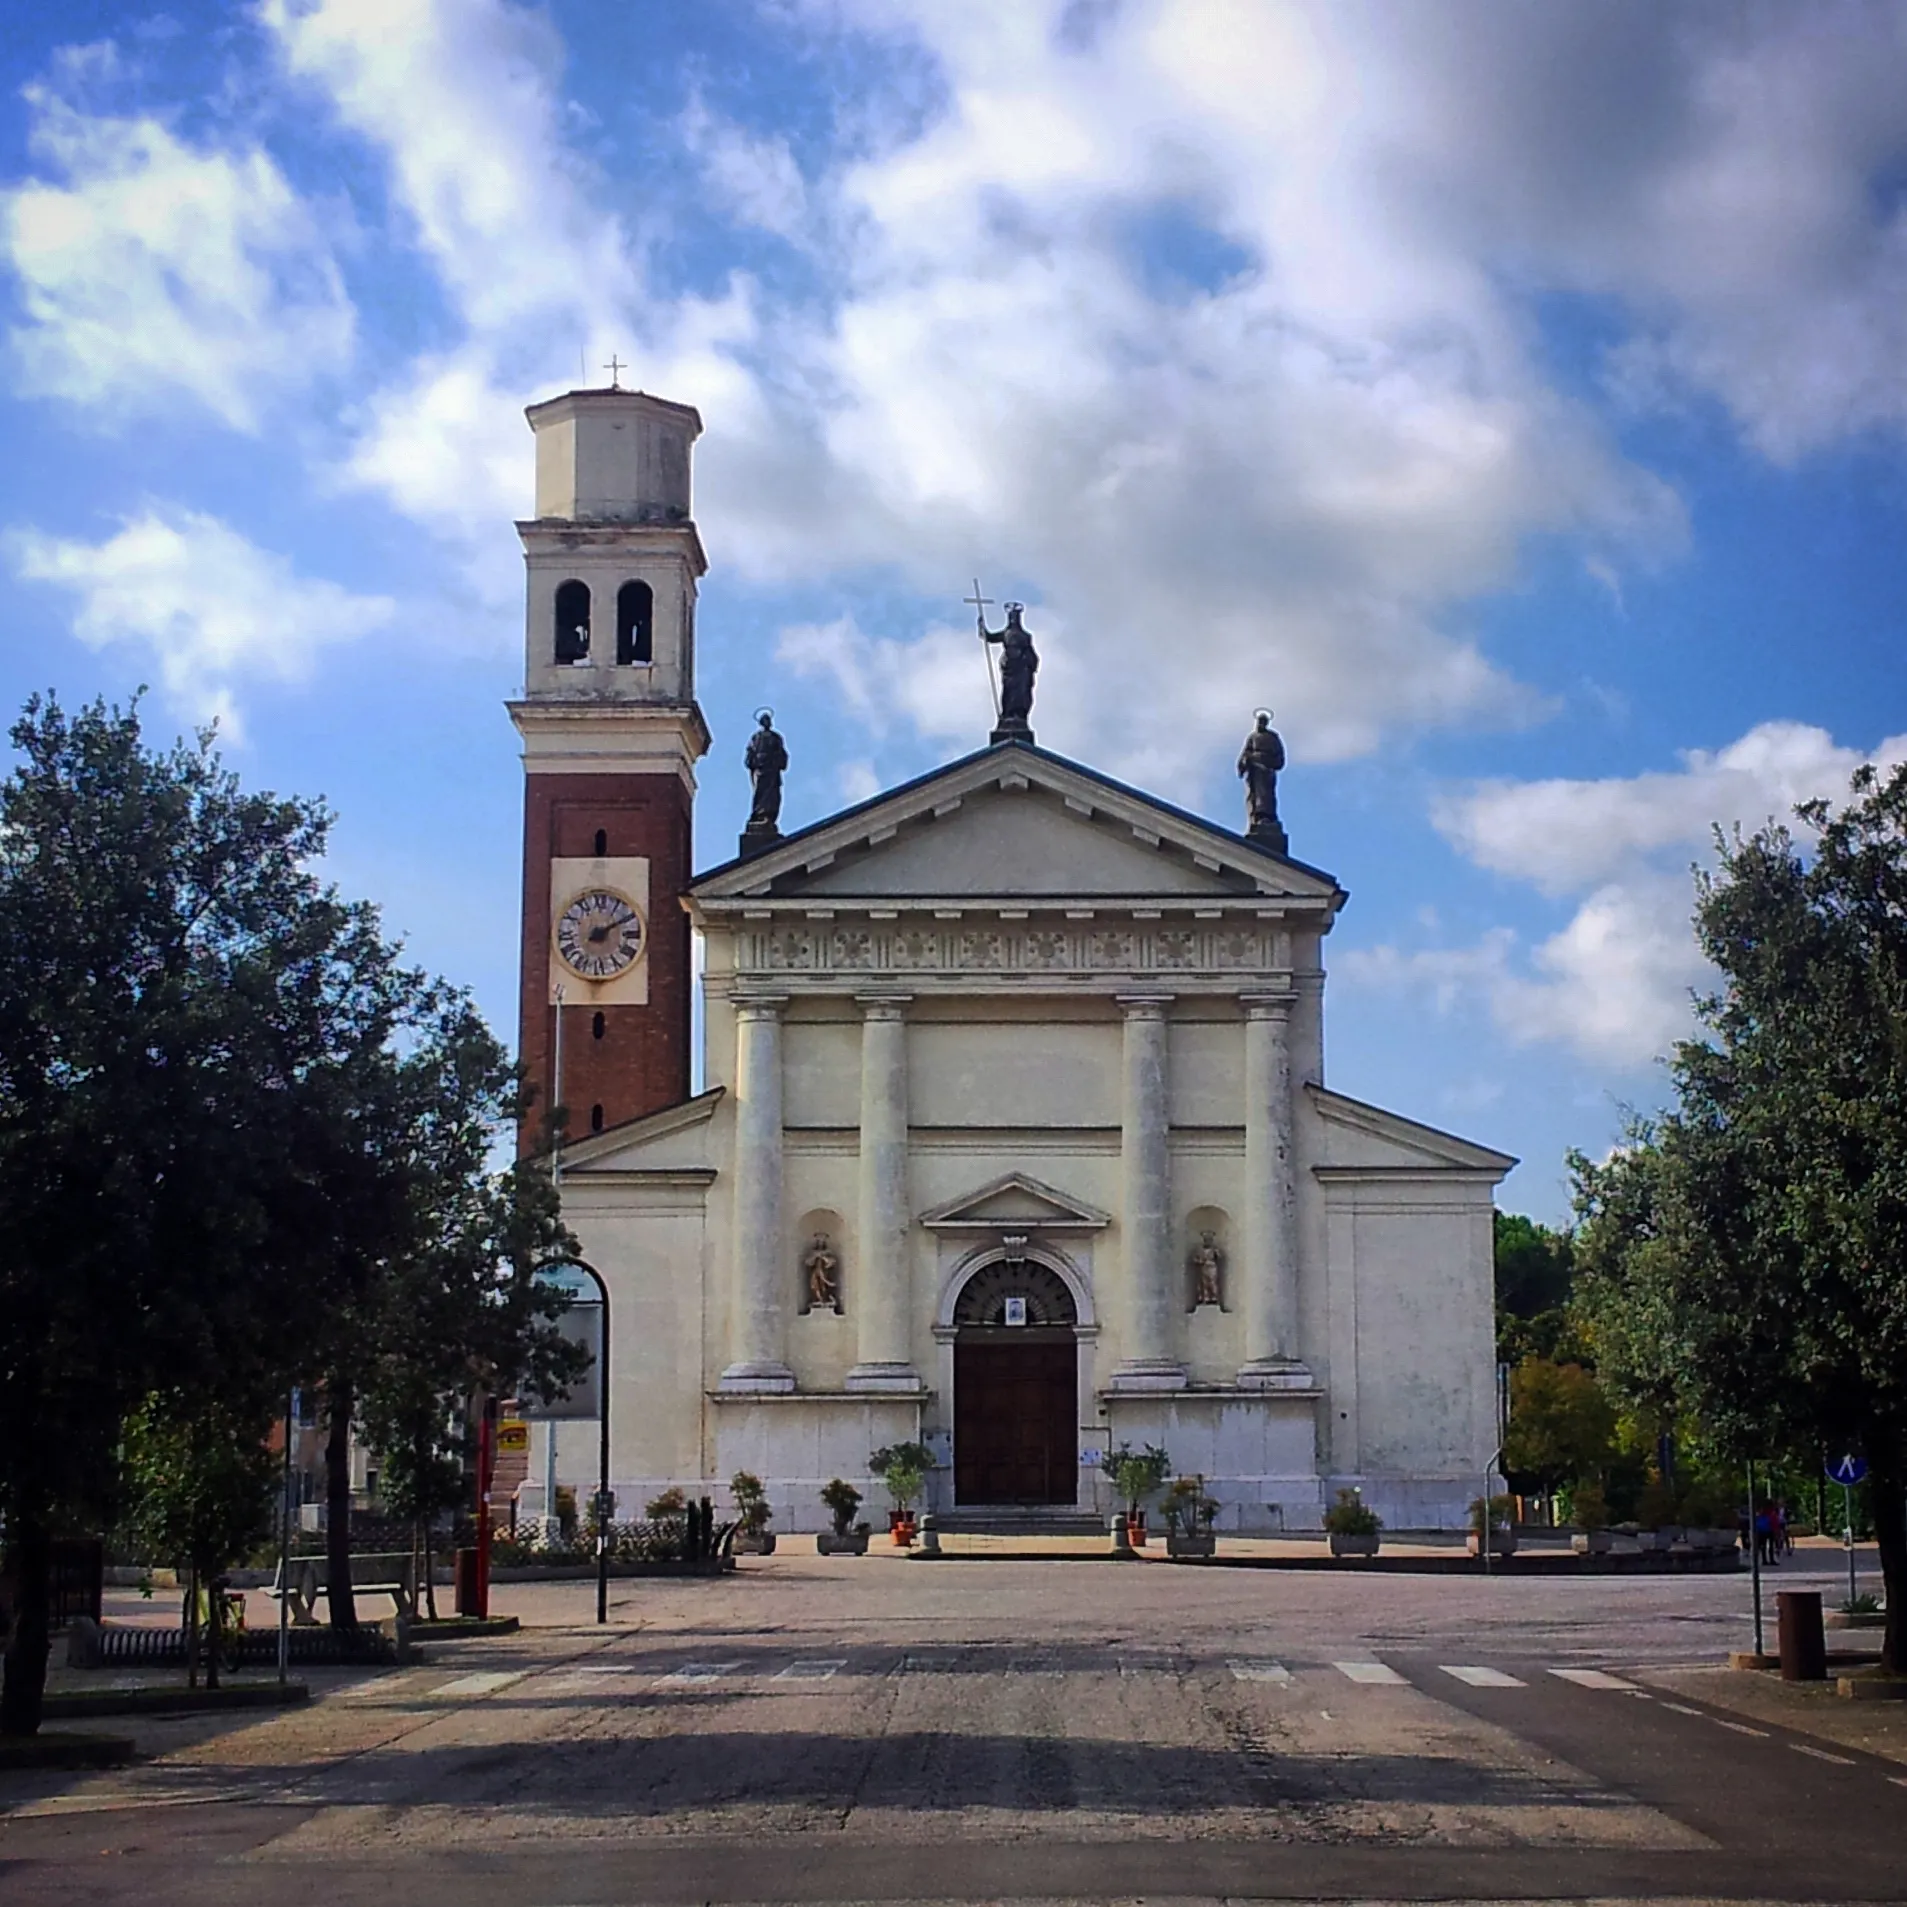 Photo showing: Christian church located in Preganziol, Italy, the Seat of the Parish of Saint Urban, patron saint of the city.